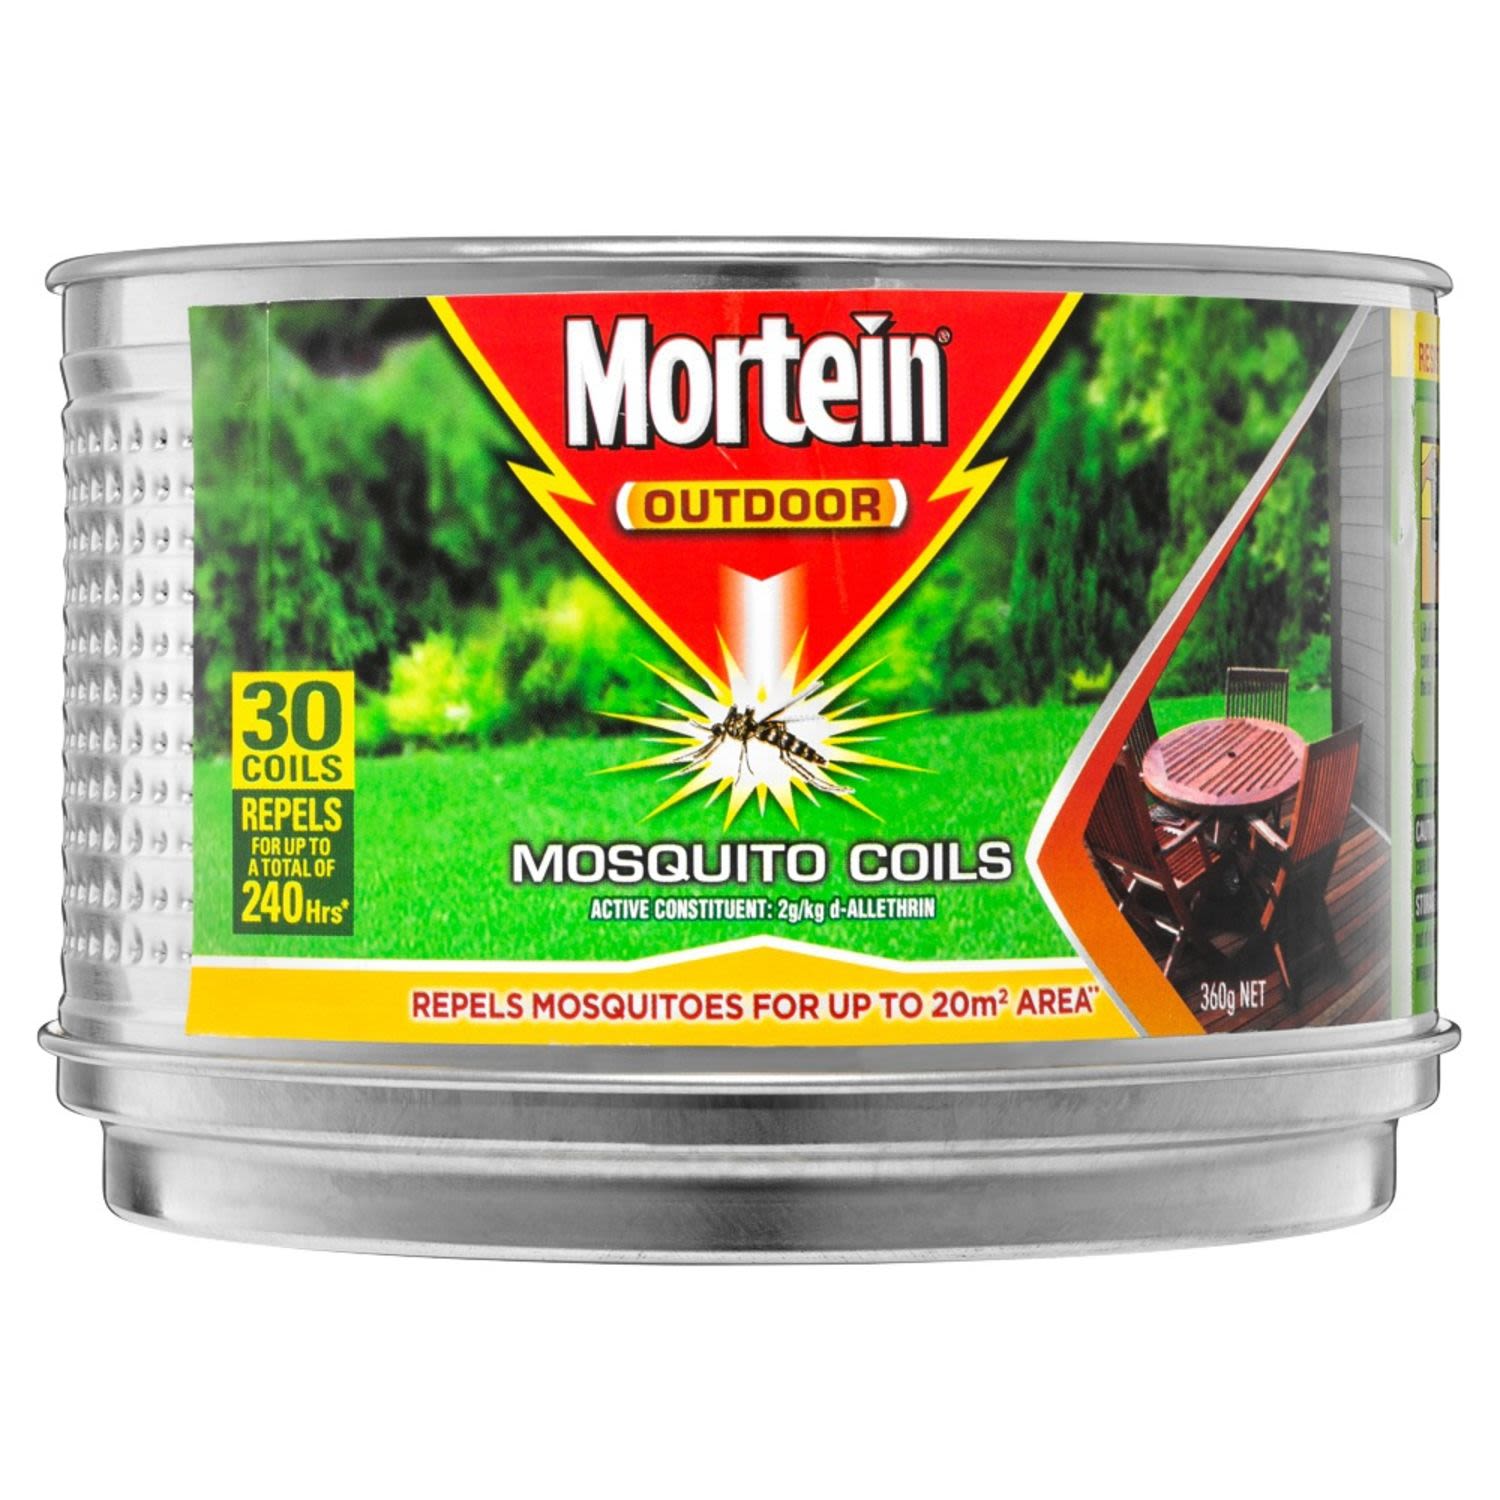 Mortein Mosquito Coils Value Pack, 30 Each